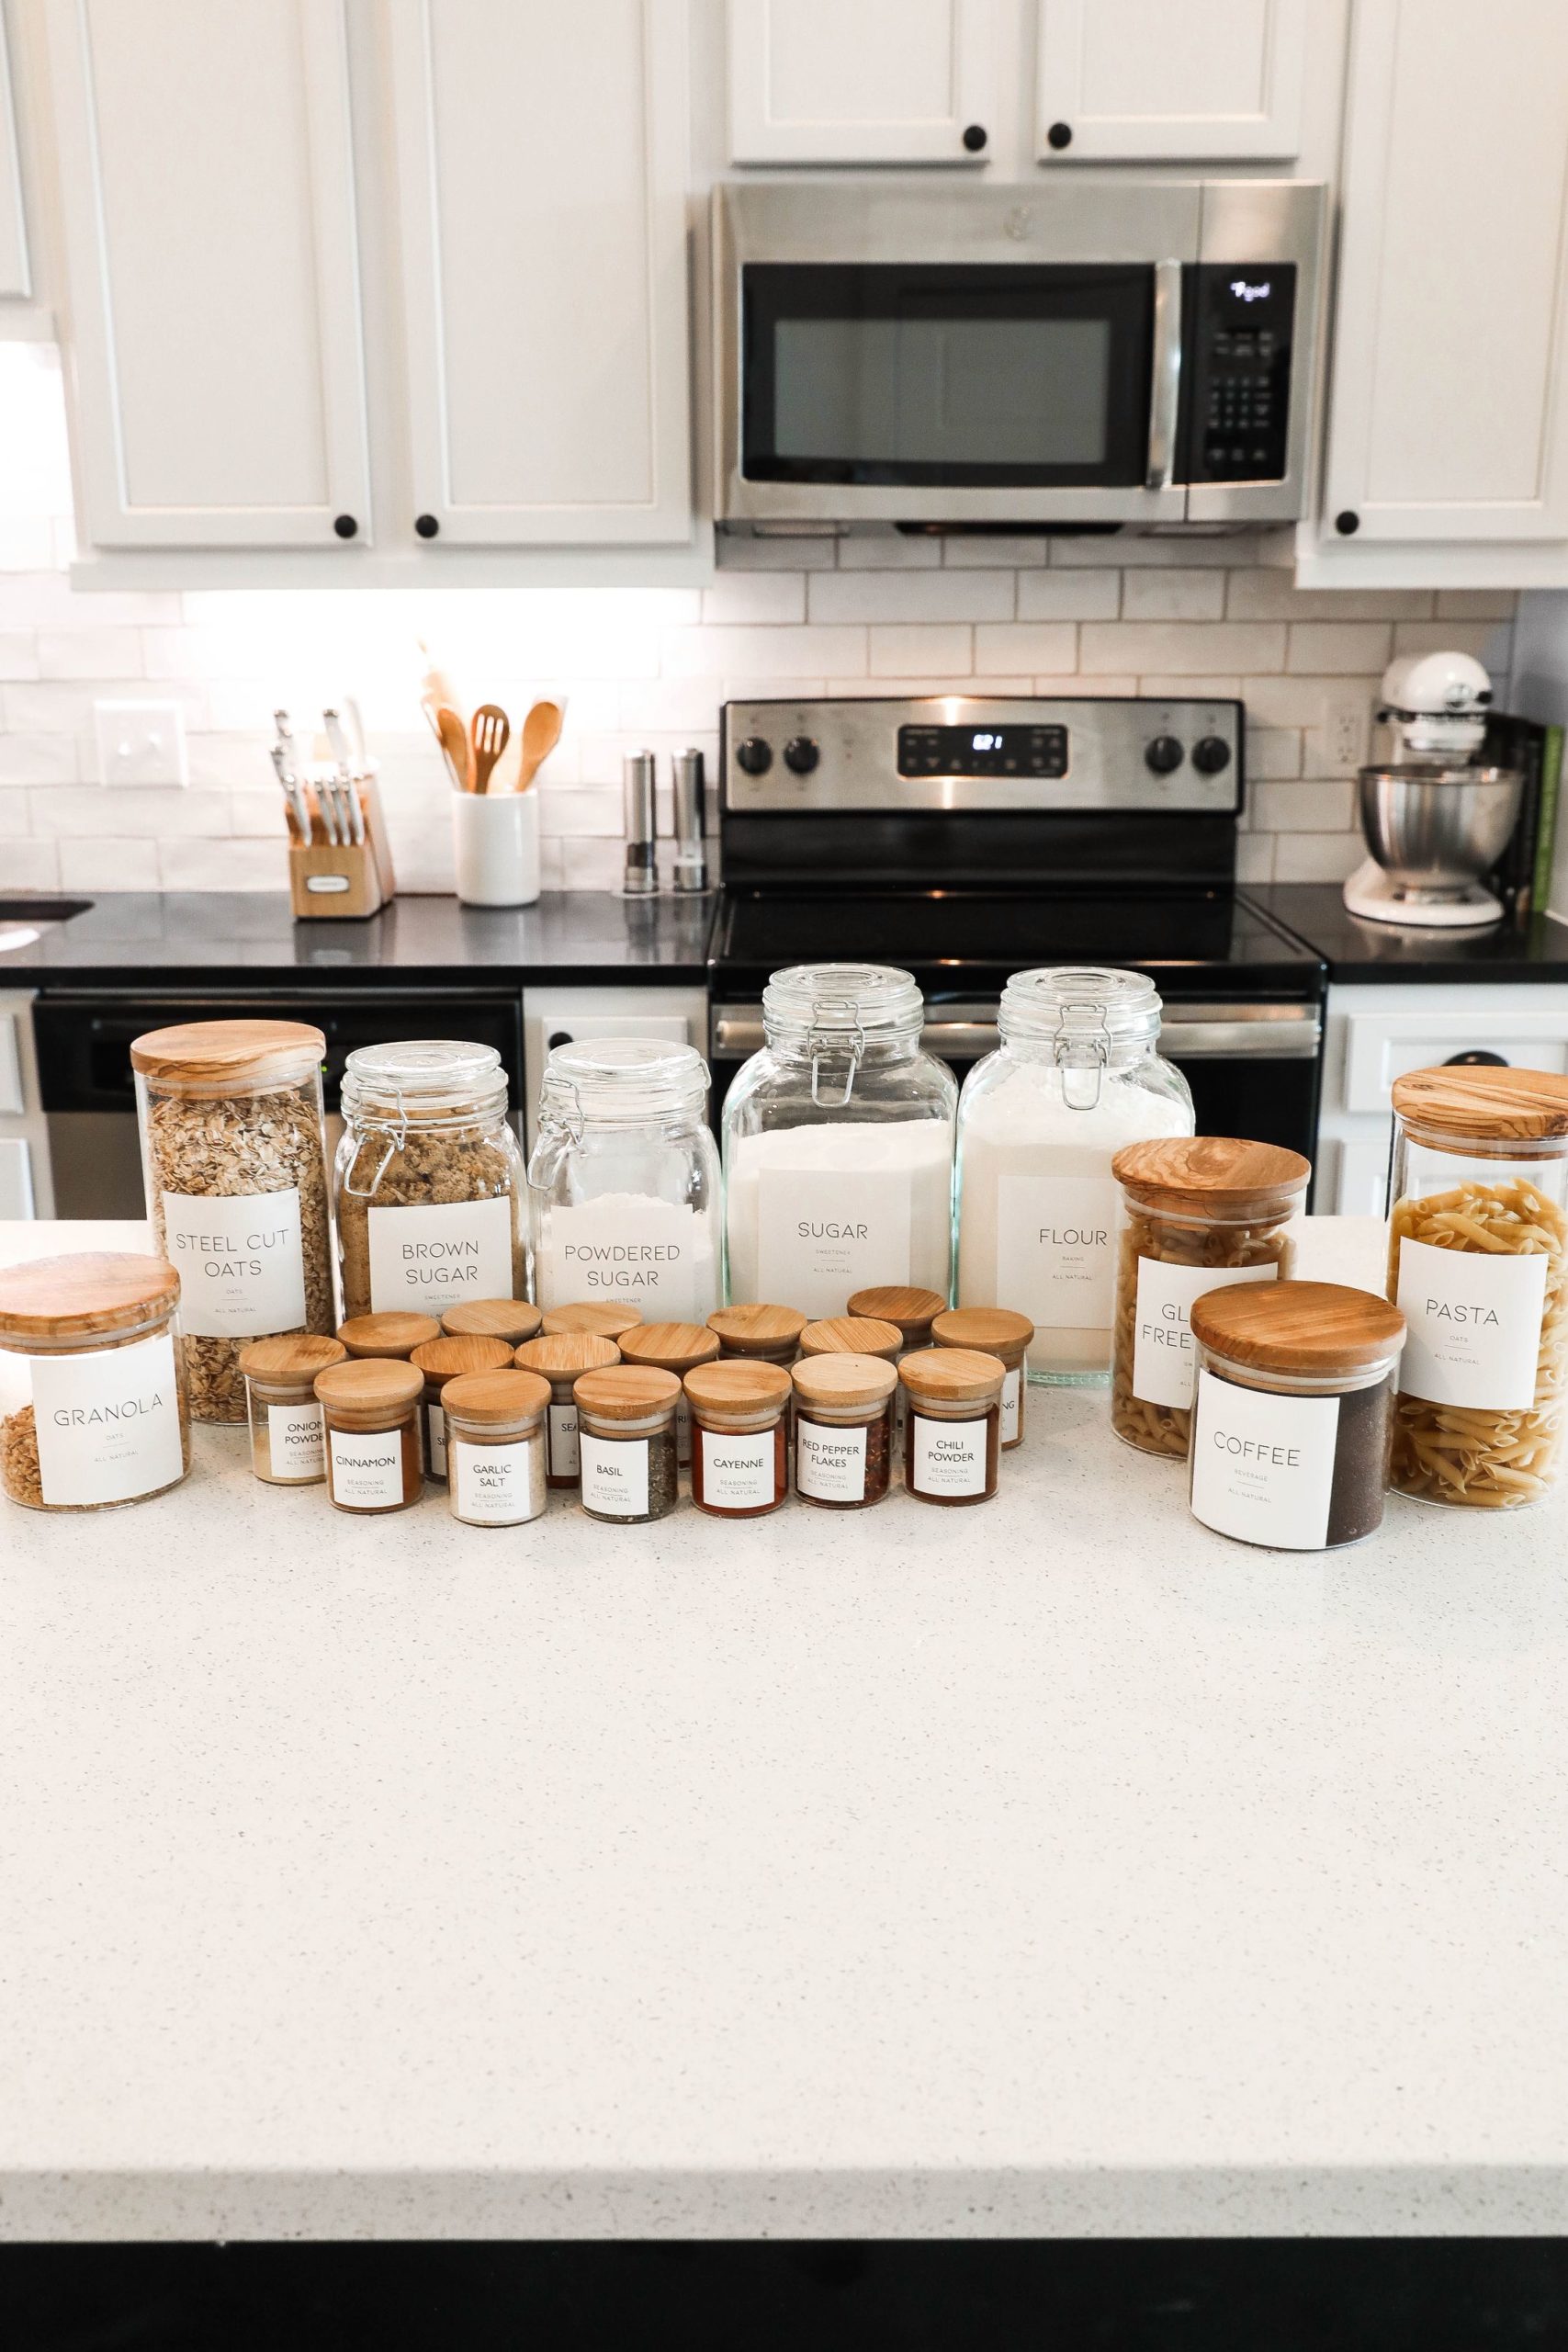 https://dailydoseofcharm.com/wp-content/uploads/2020/08/Spice-jars-kitchen-labels-free-printout-pantry-cabinet-organization-daily-dose-of-charm-lauren-lindmark-IMG_4346-scaled.jpg